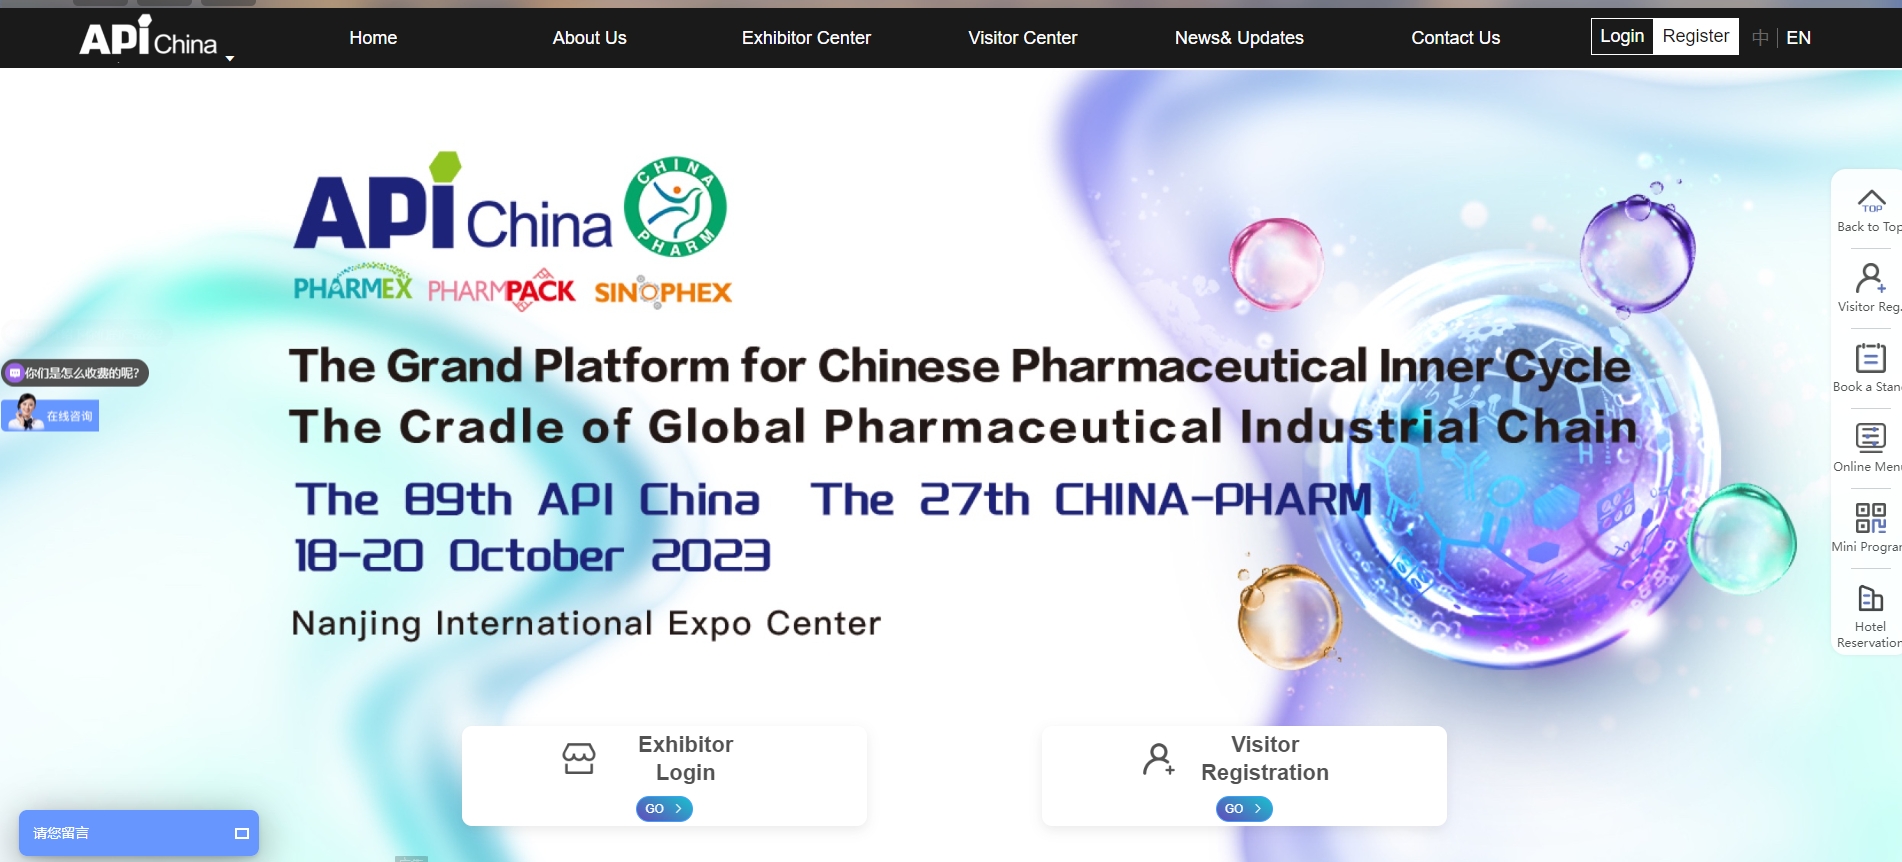 We attend API China for capsule blister case